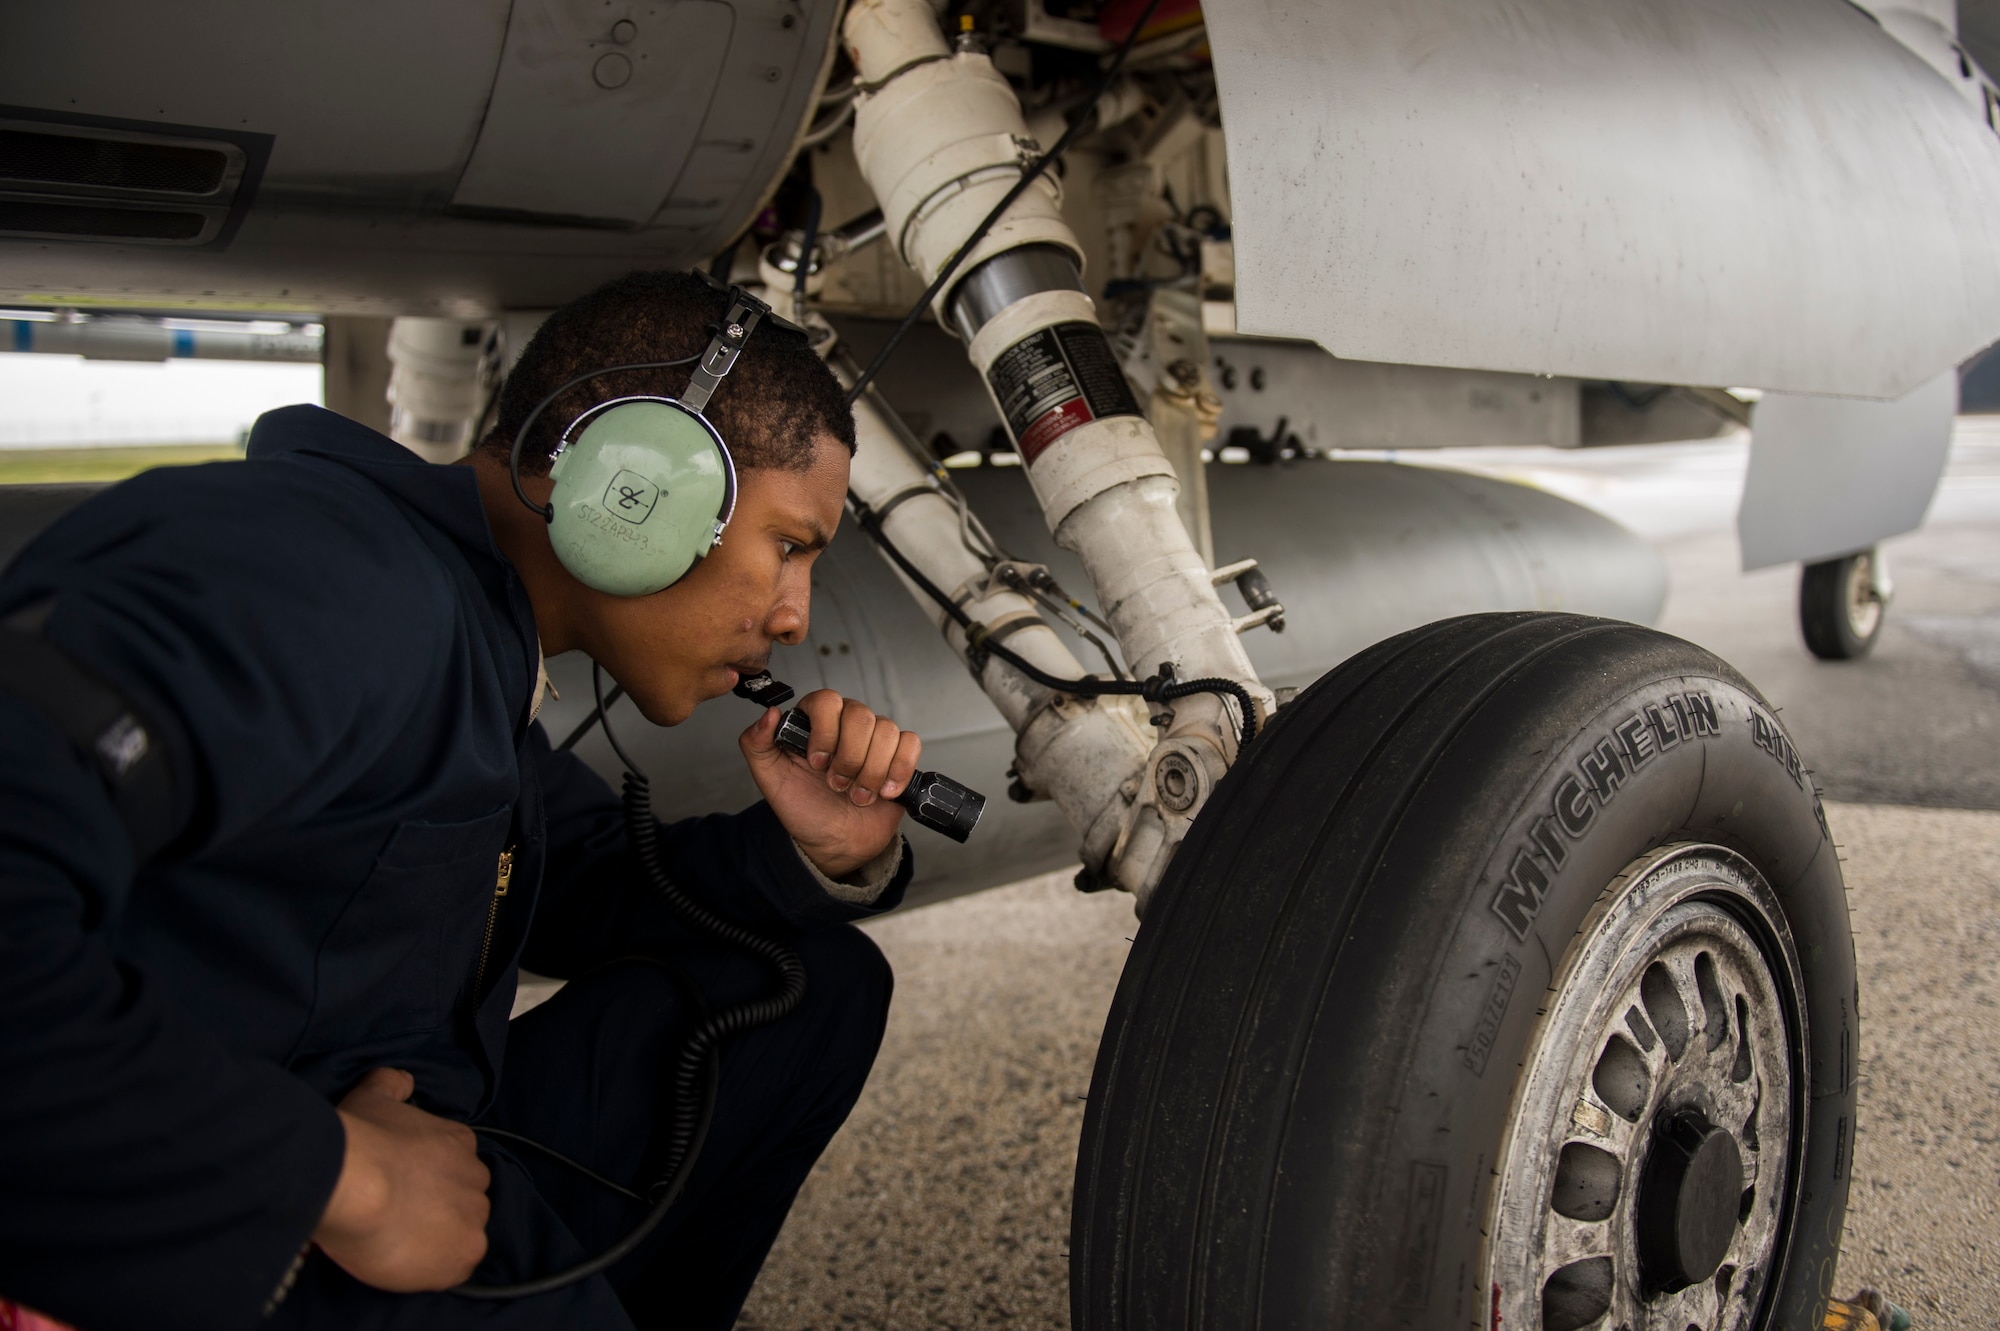 Airman 1st Class Derek Larsen, 52nd Aircraft Maintenance Squadron assistant dedicated crew chief, inspects the tire of a U.S. Air Force F-16 Fighting Falcon assigned to the 480th Fighter Squadron during a "14 front" launch at Spangdahlem Air Base, Germany, May 4th, 2017. From April 24 to May 5, the 480th FS and 52nd Aircraft Maintenance Squadron supported 26 sorties a day, 14 in the morning and 12 in the afternoon. This flying tempo is referred to as a, “14 turn 12,” and is a 16 percent increase over normal operations. During normal operations, it’s standard to launch a 12 turn 10, or 4 fewer sorties per day. Preparing and launching 14 aircraft in one go is referred to as a “14 front.” (U.S. Air Force photo by Preston Cherry)